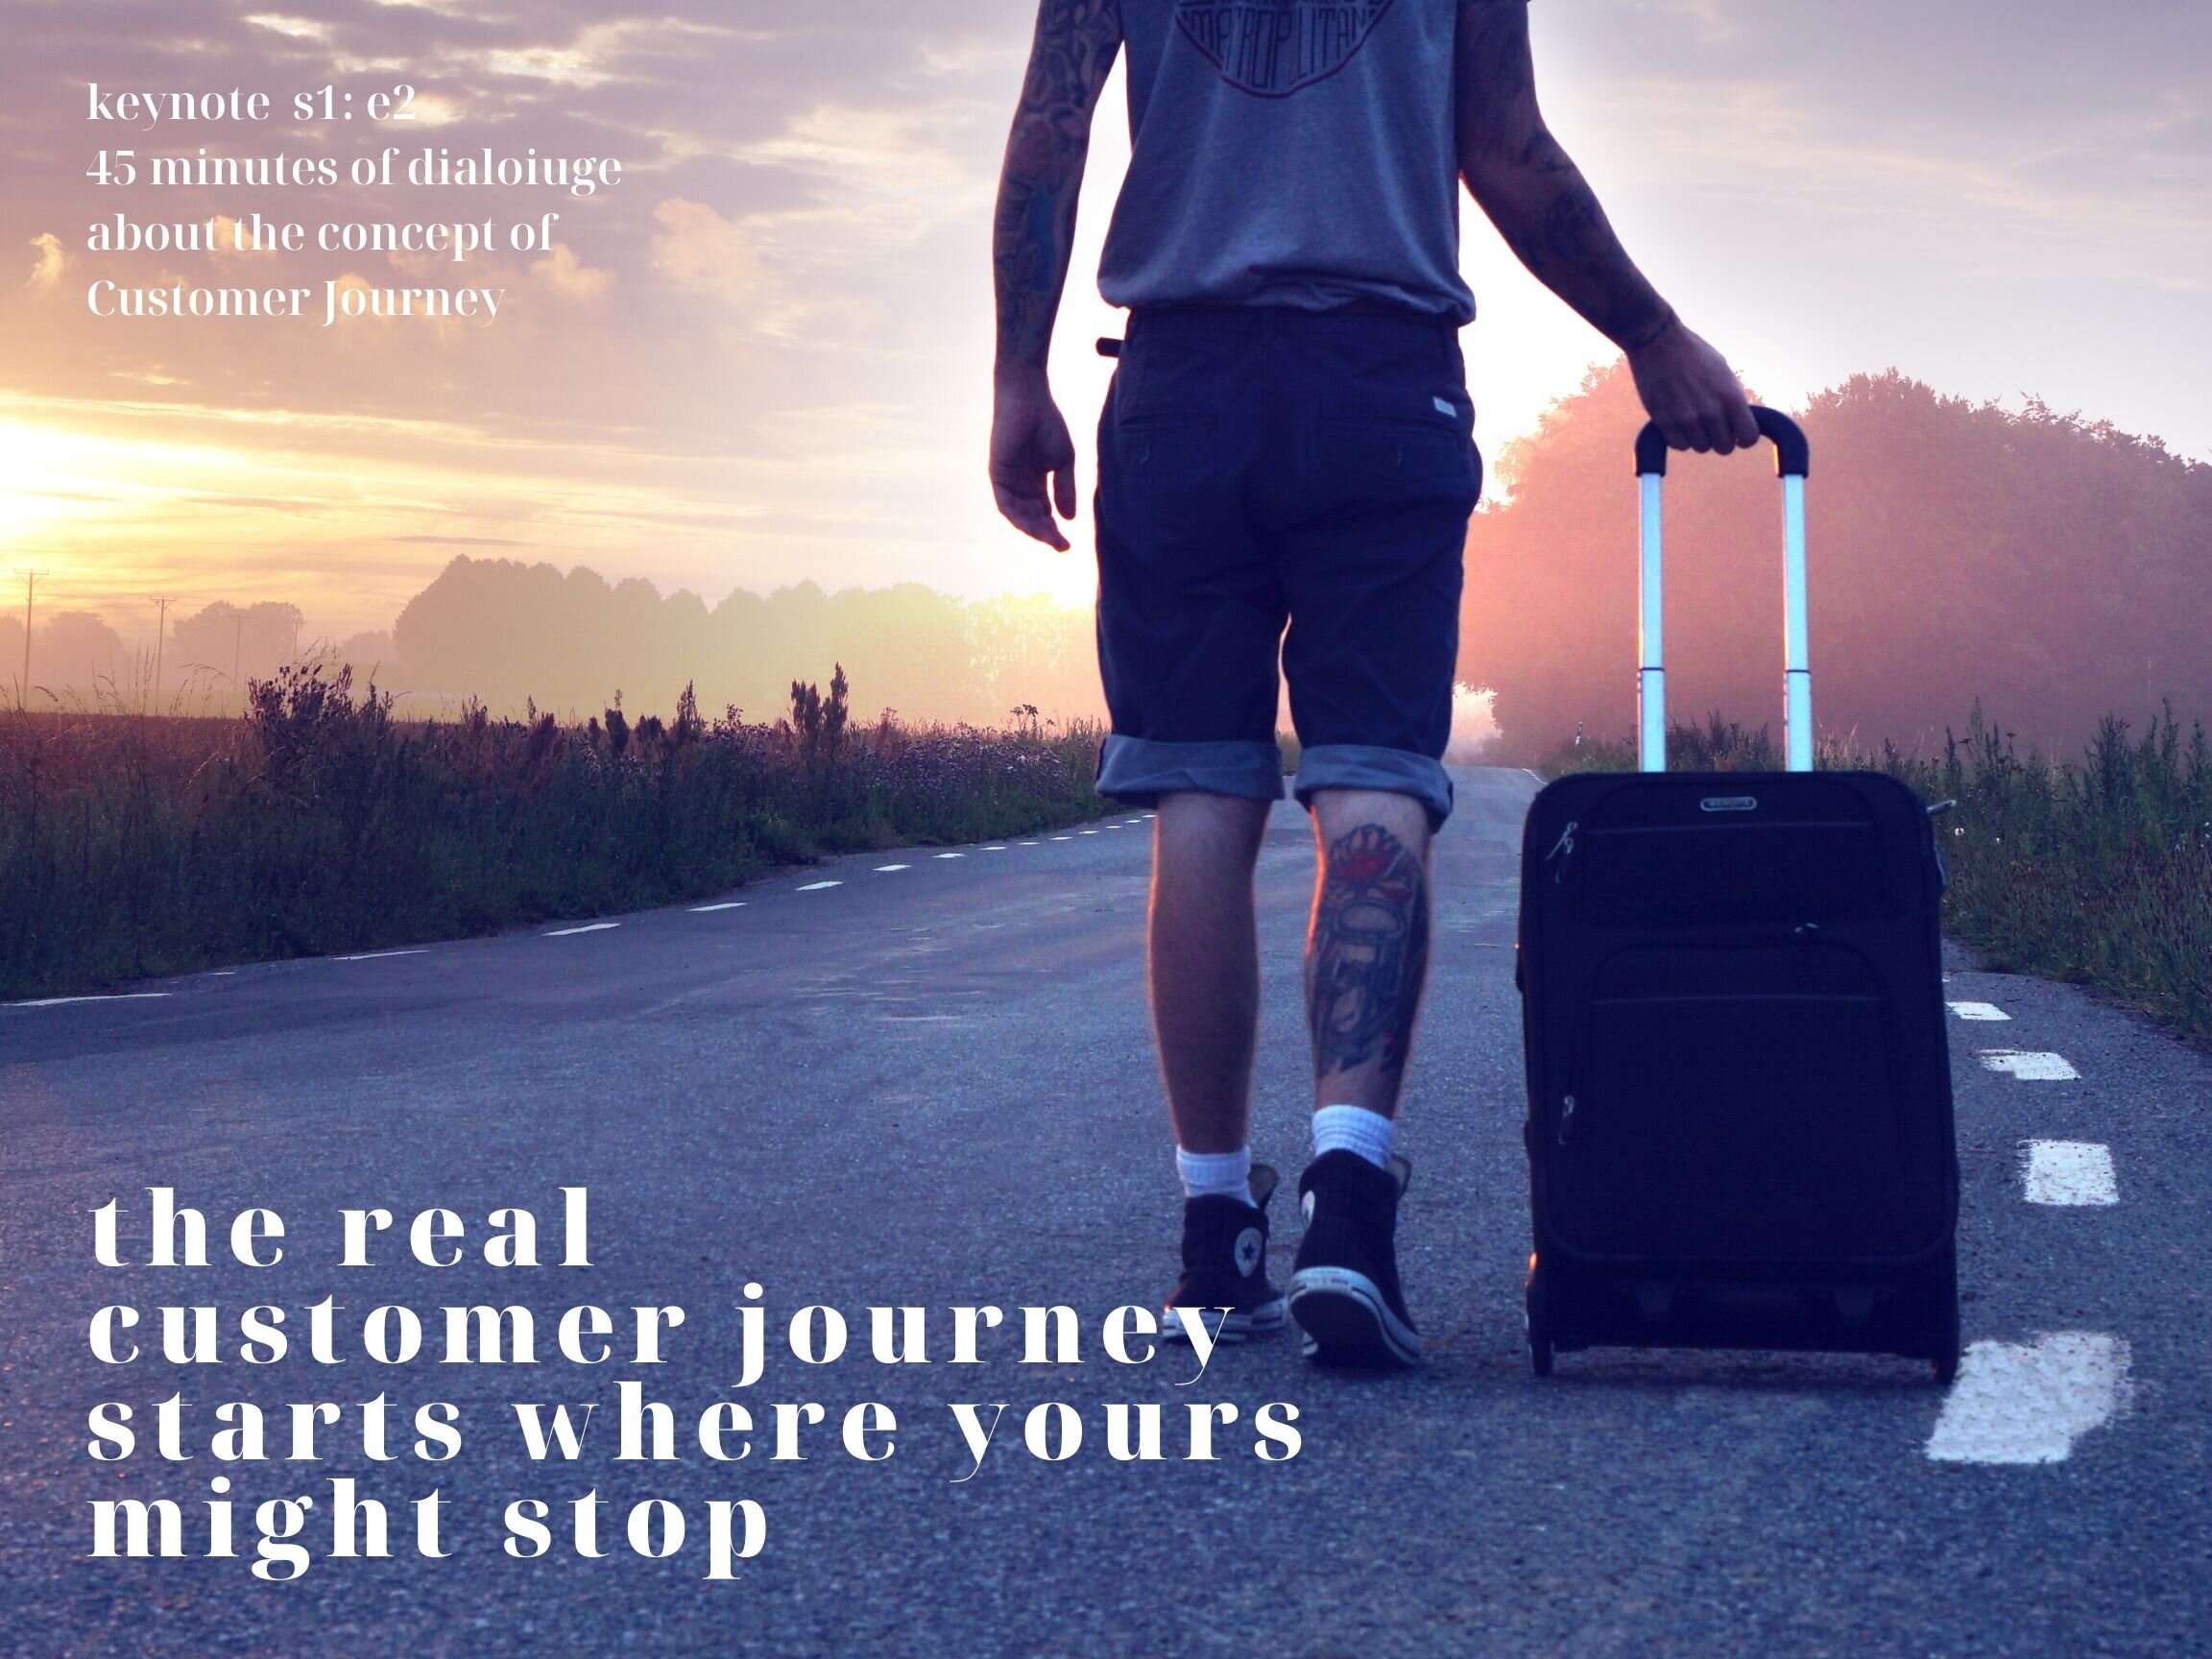 THE REAL CUSTOMER JOURNEY KEYNOTE